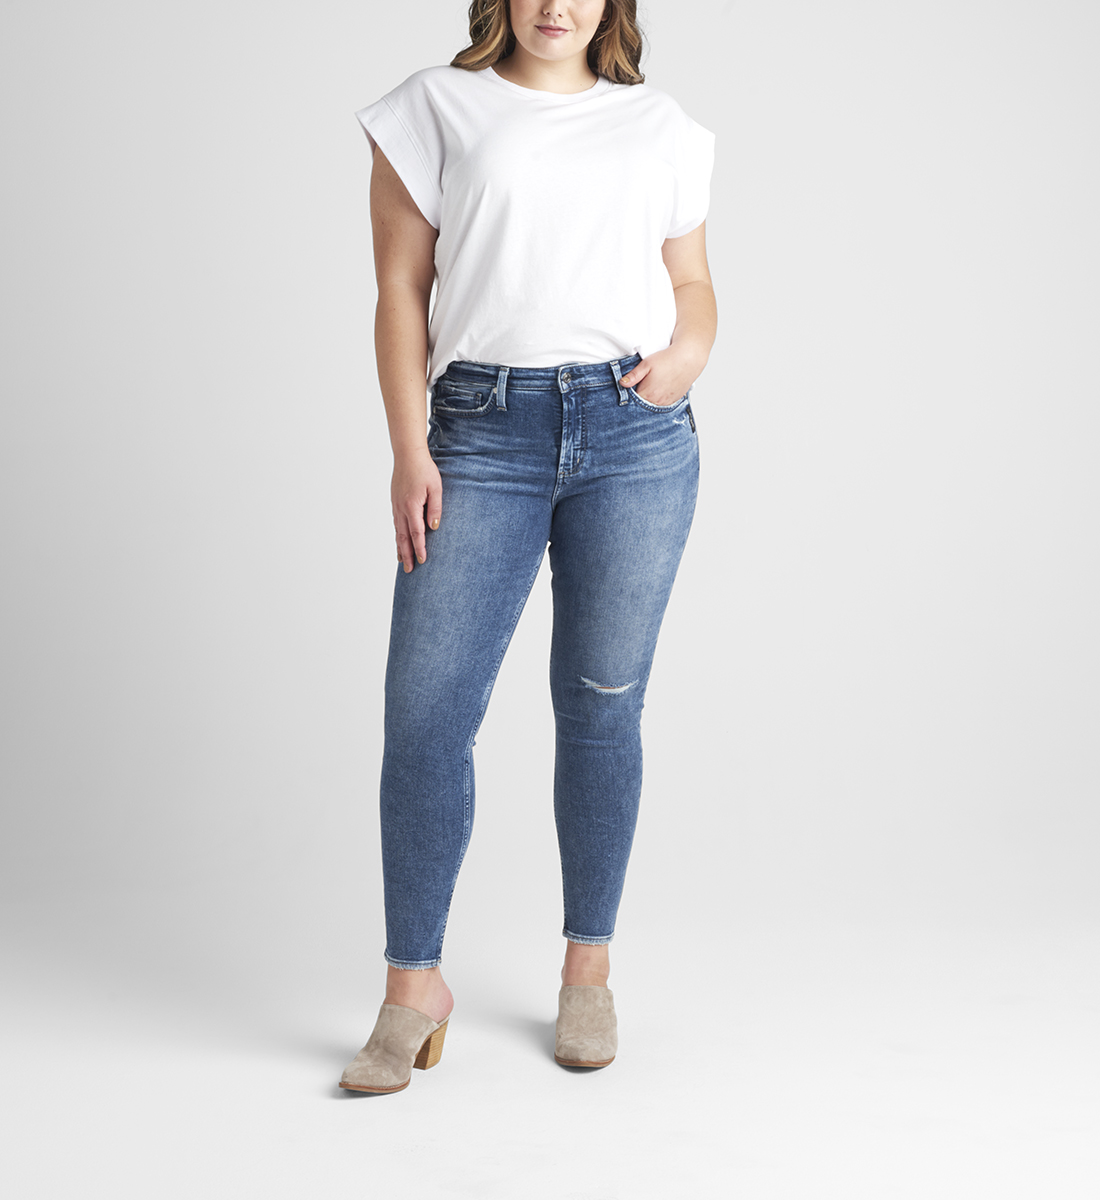 Silver Jeans Most Wanted Mid Rise Skinny Jeans Plus Size